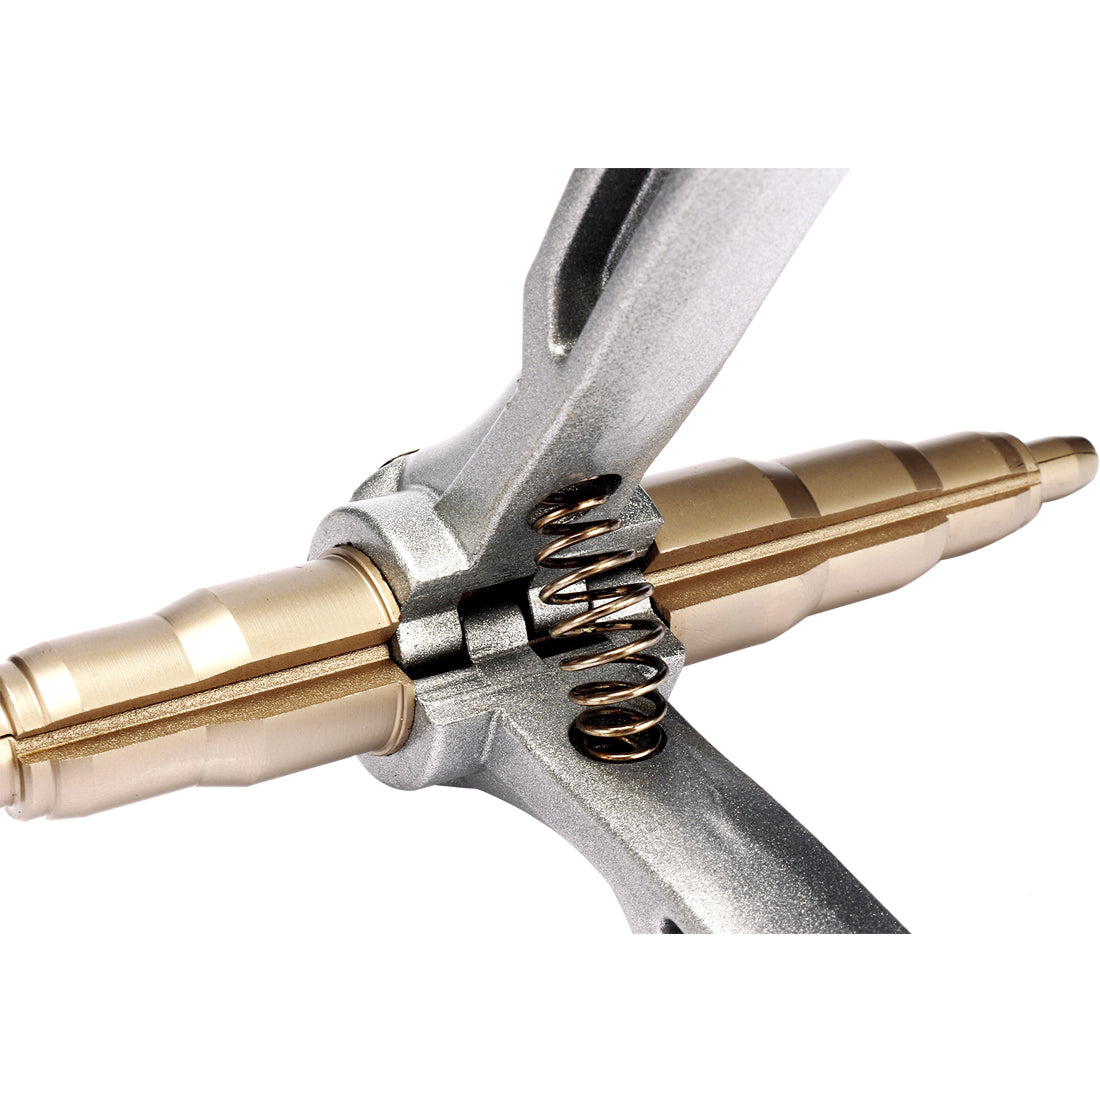 uxcell Uxcell Universal Refrigeration Copper Tube Expander 1/4" 5/16" 3/8" 1/2" 5/8" 3/4" 7/8"